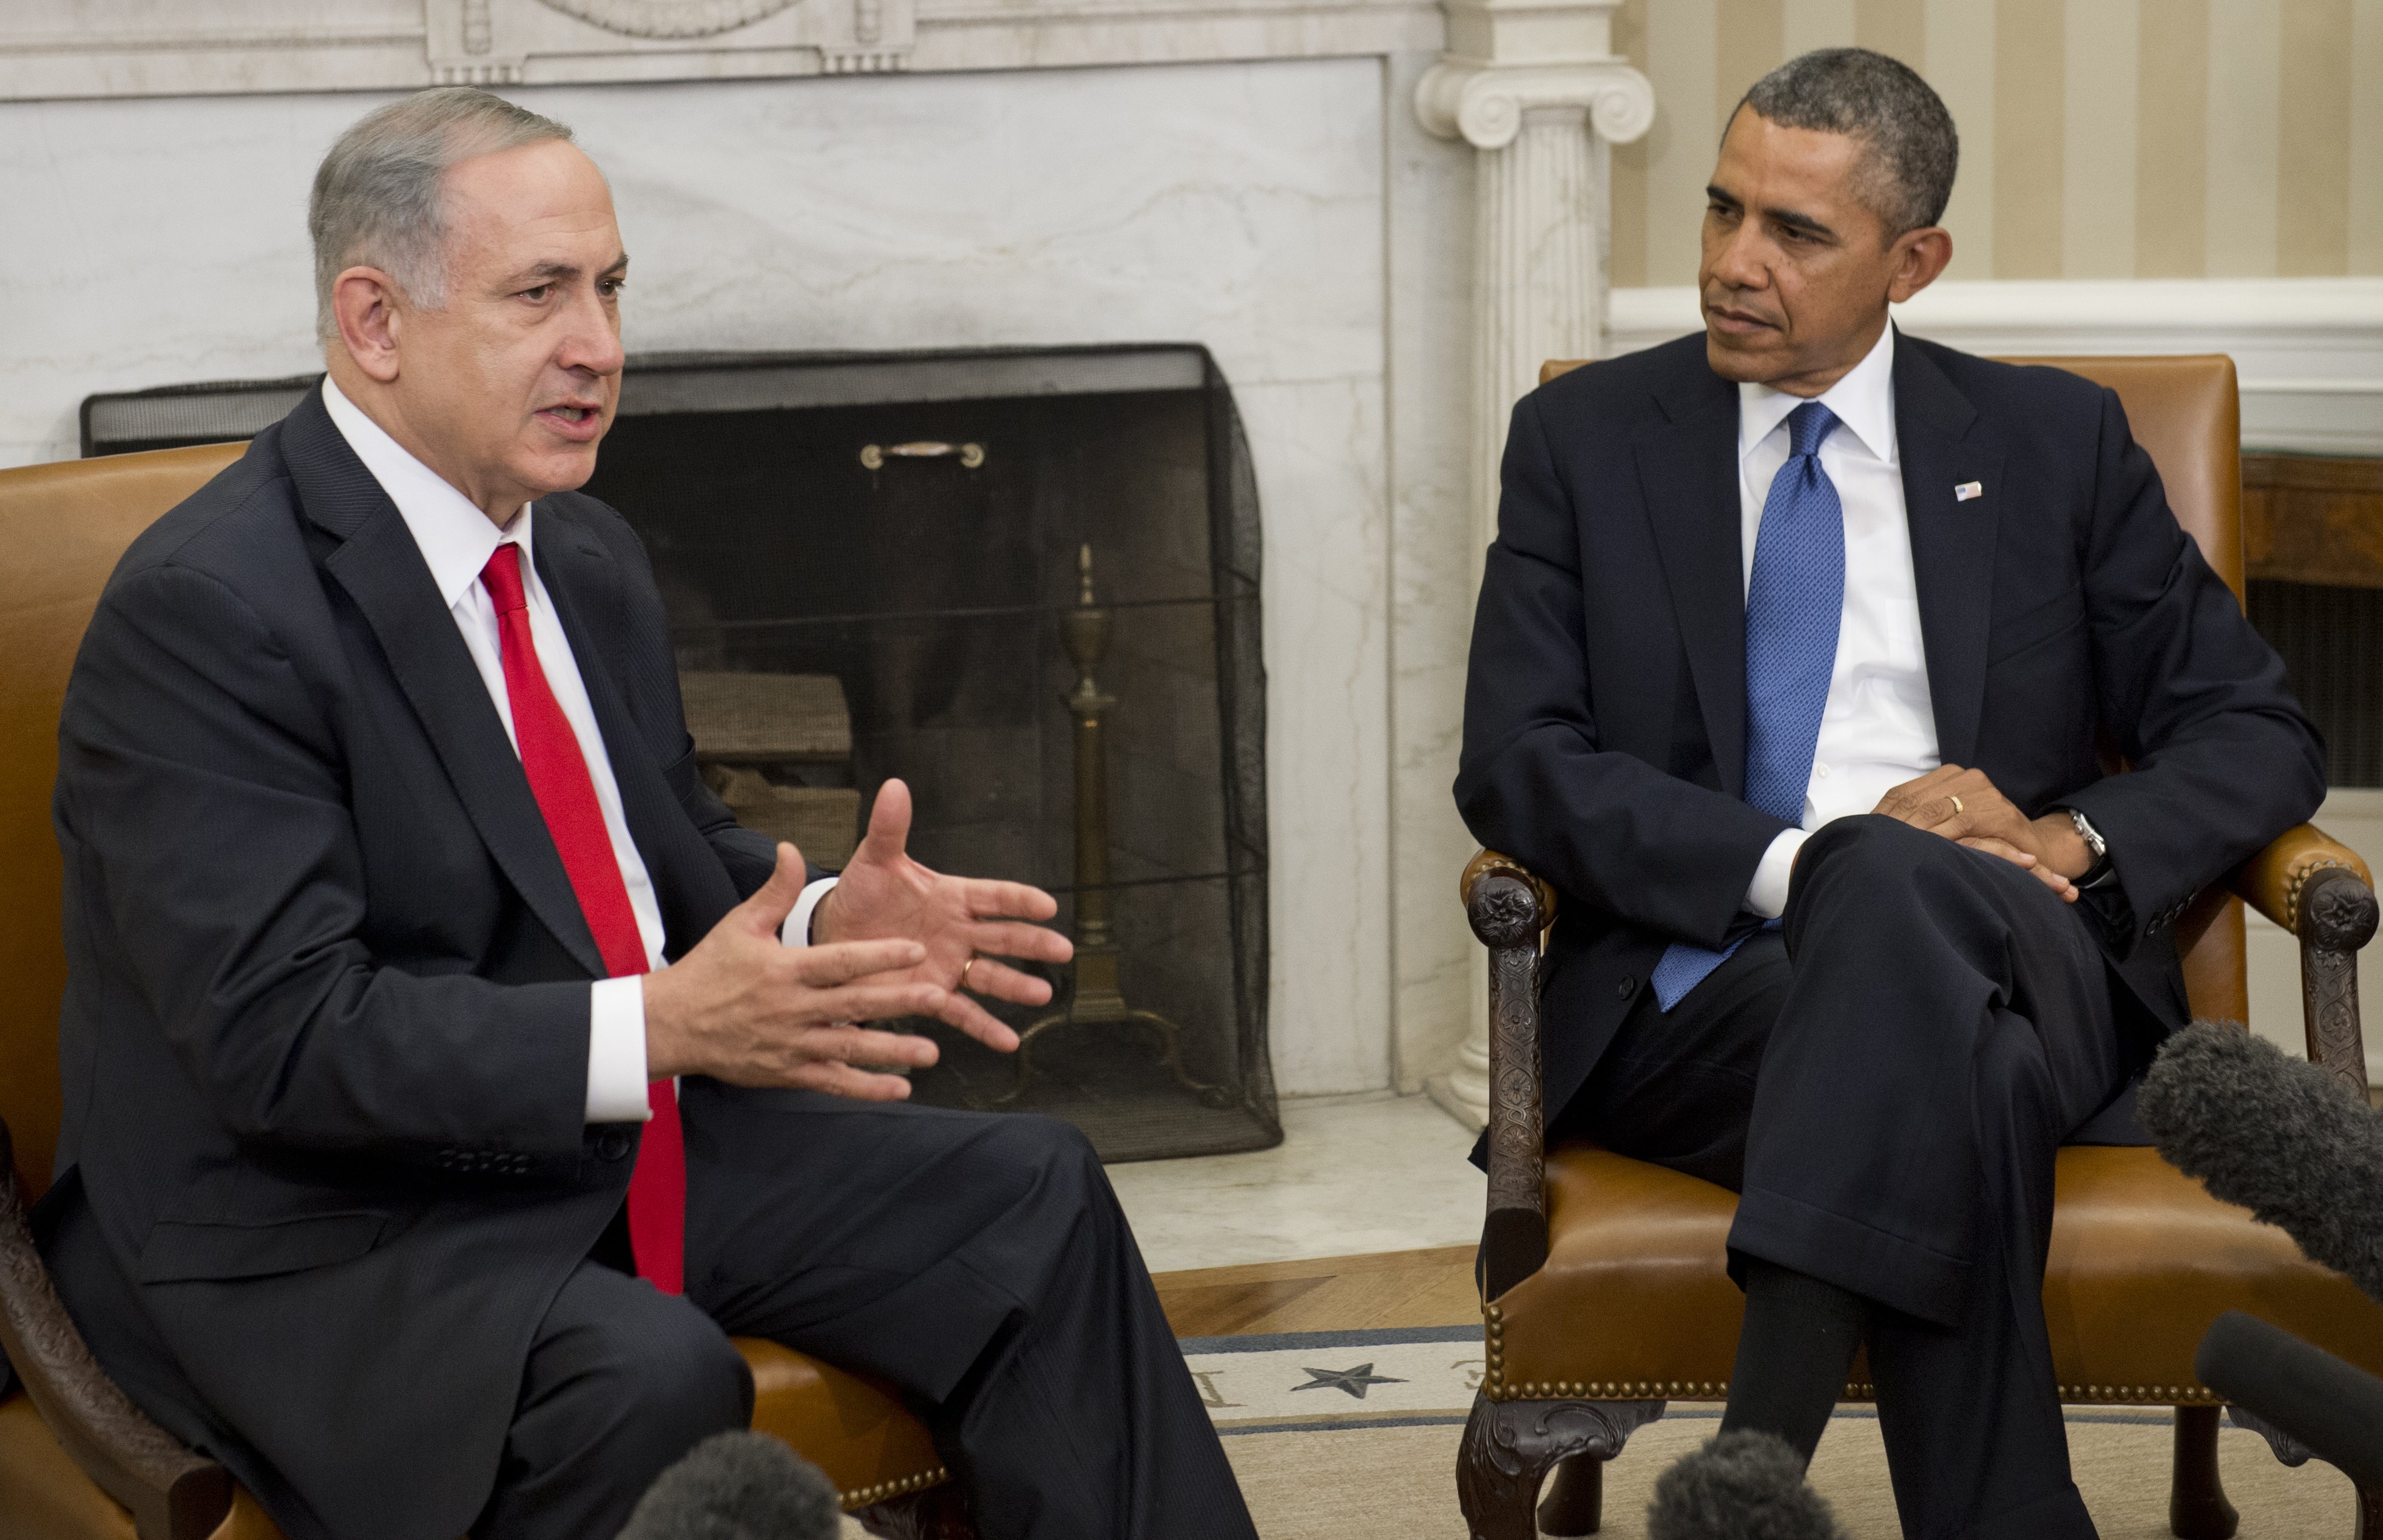 US President Barack Obama(R) and Israeli Prime Minister Benjamin Netanyahu hold a meeting in the Oval Office of the White House in Washington on March 3, 2014. (Saul Loeb—AFP/Getty Images)